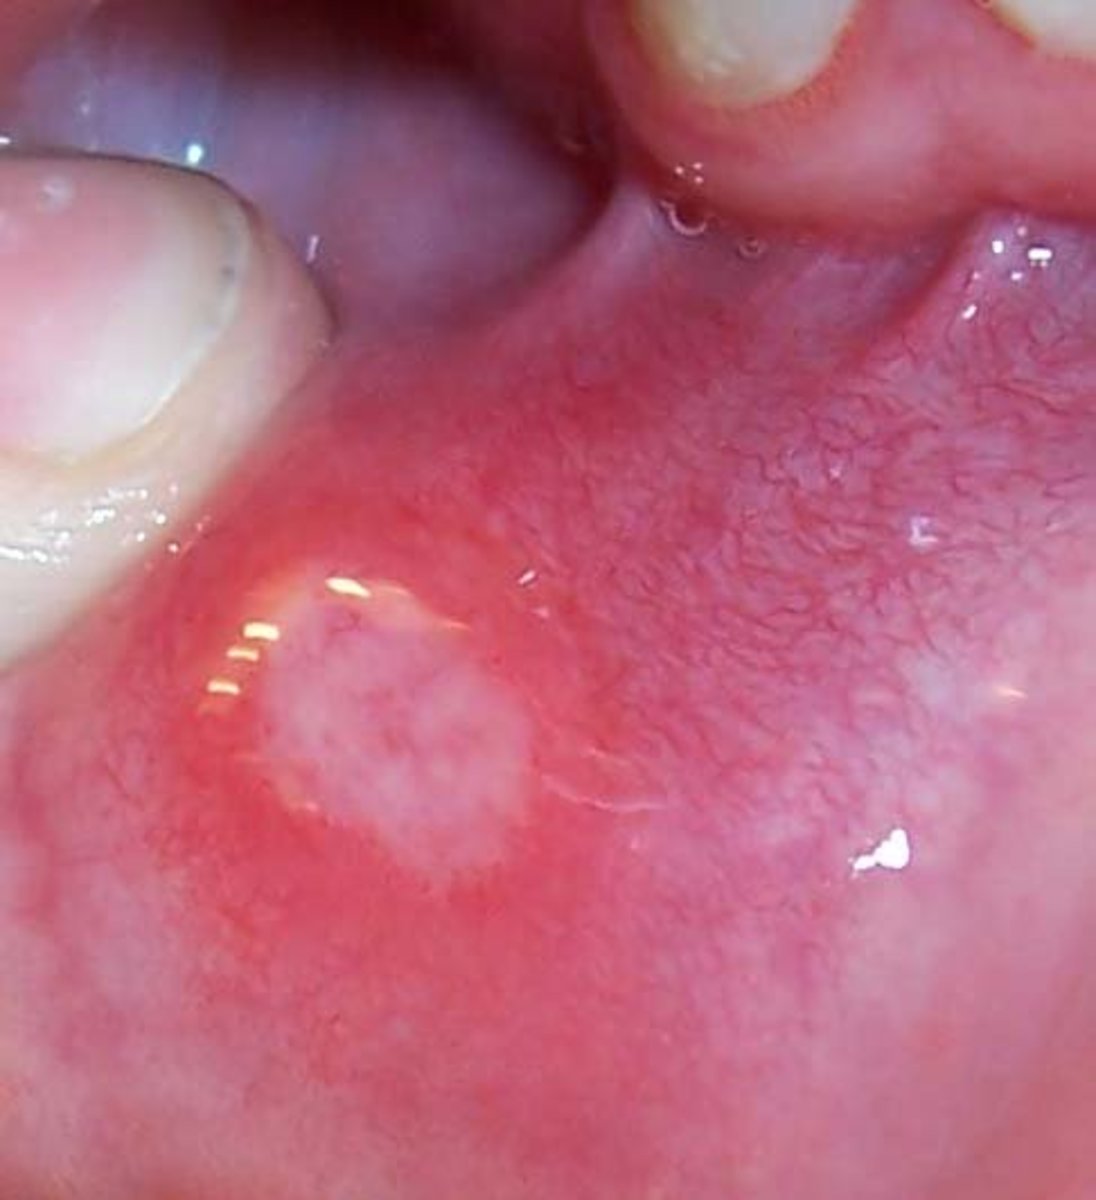 A canker sore on the inner lip. Published under GFDL in English Wiki, CC BY-SA 3.0